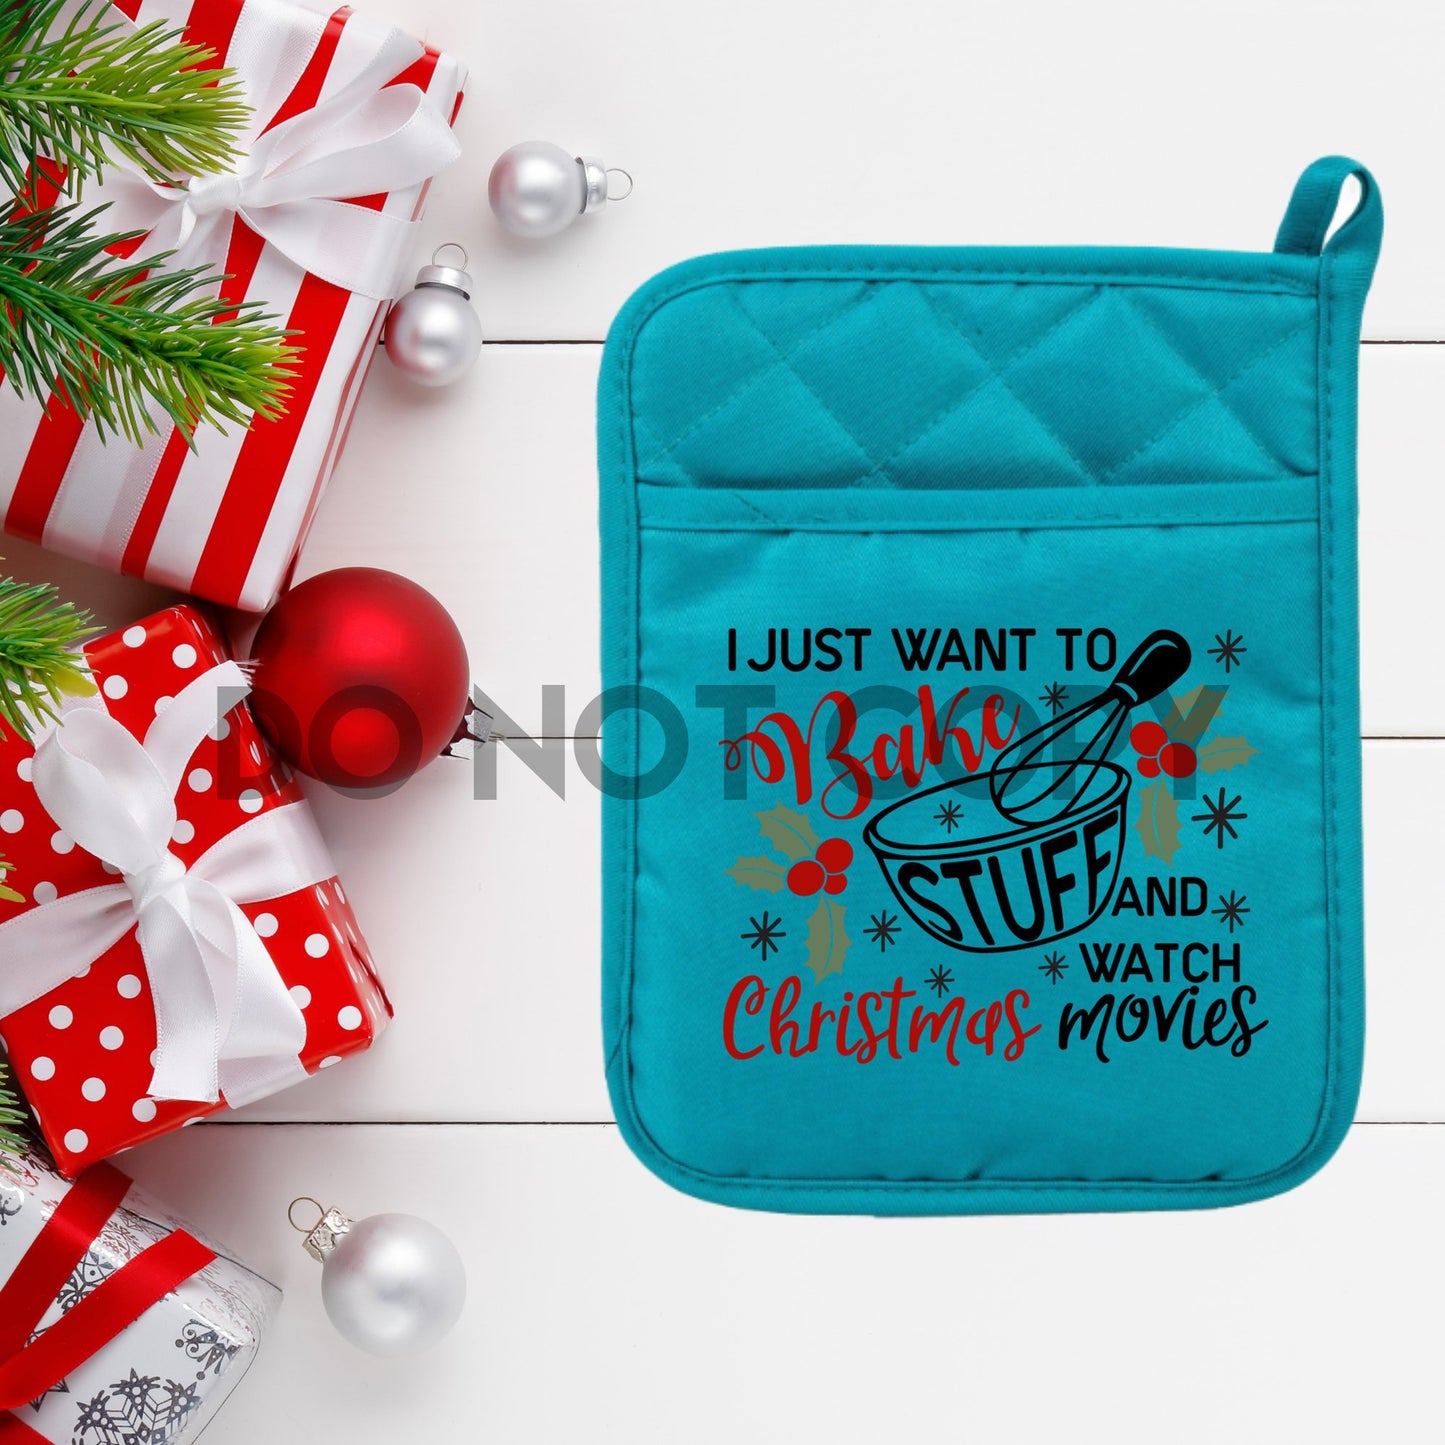 I just want to bake stuff and watch Christmas movies Oven mitt pot holder HIGH HEAT Full color Screen Print transfer